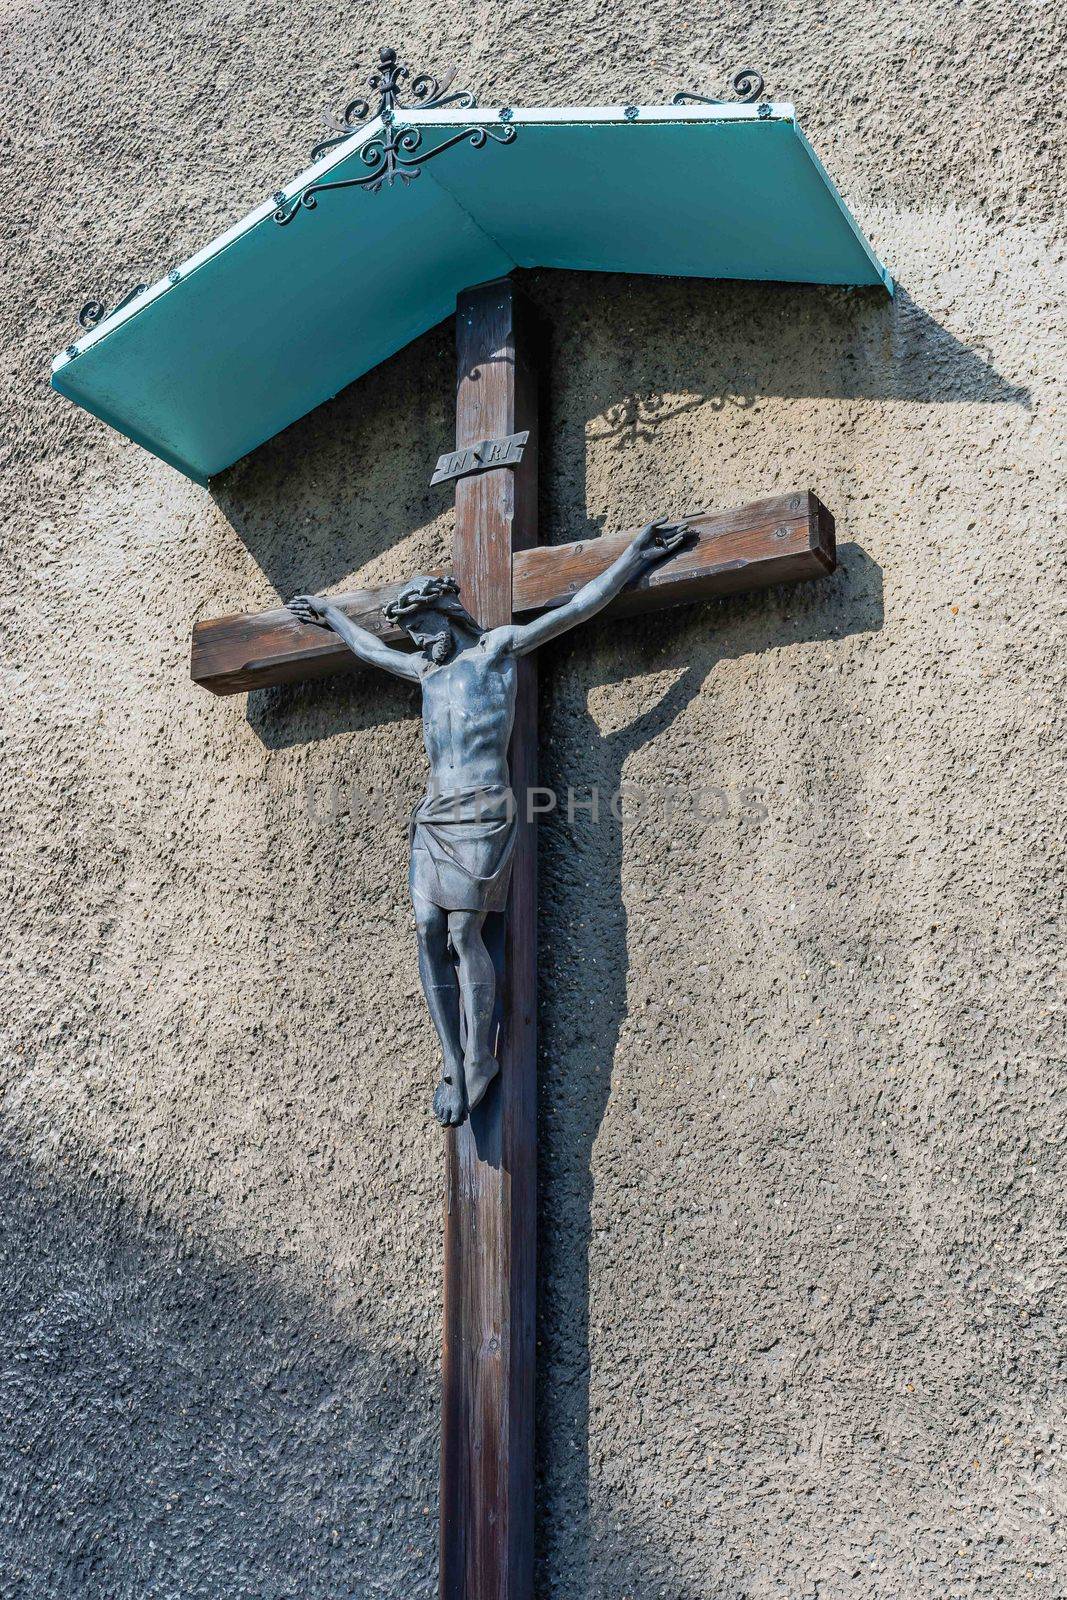 Statue of Jesus Christ crucified on the wall of the St. Peter and Paul church, in Tarnowskie Gory, Silesia region, Poland.